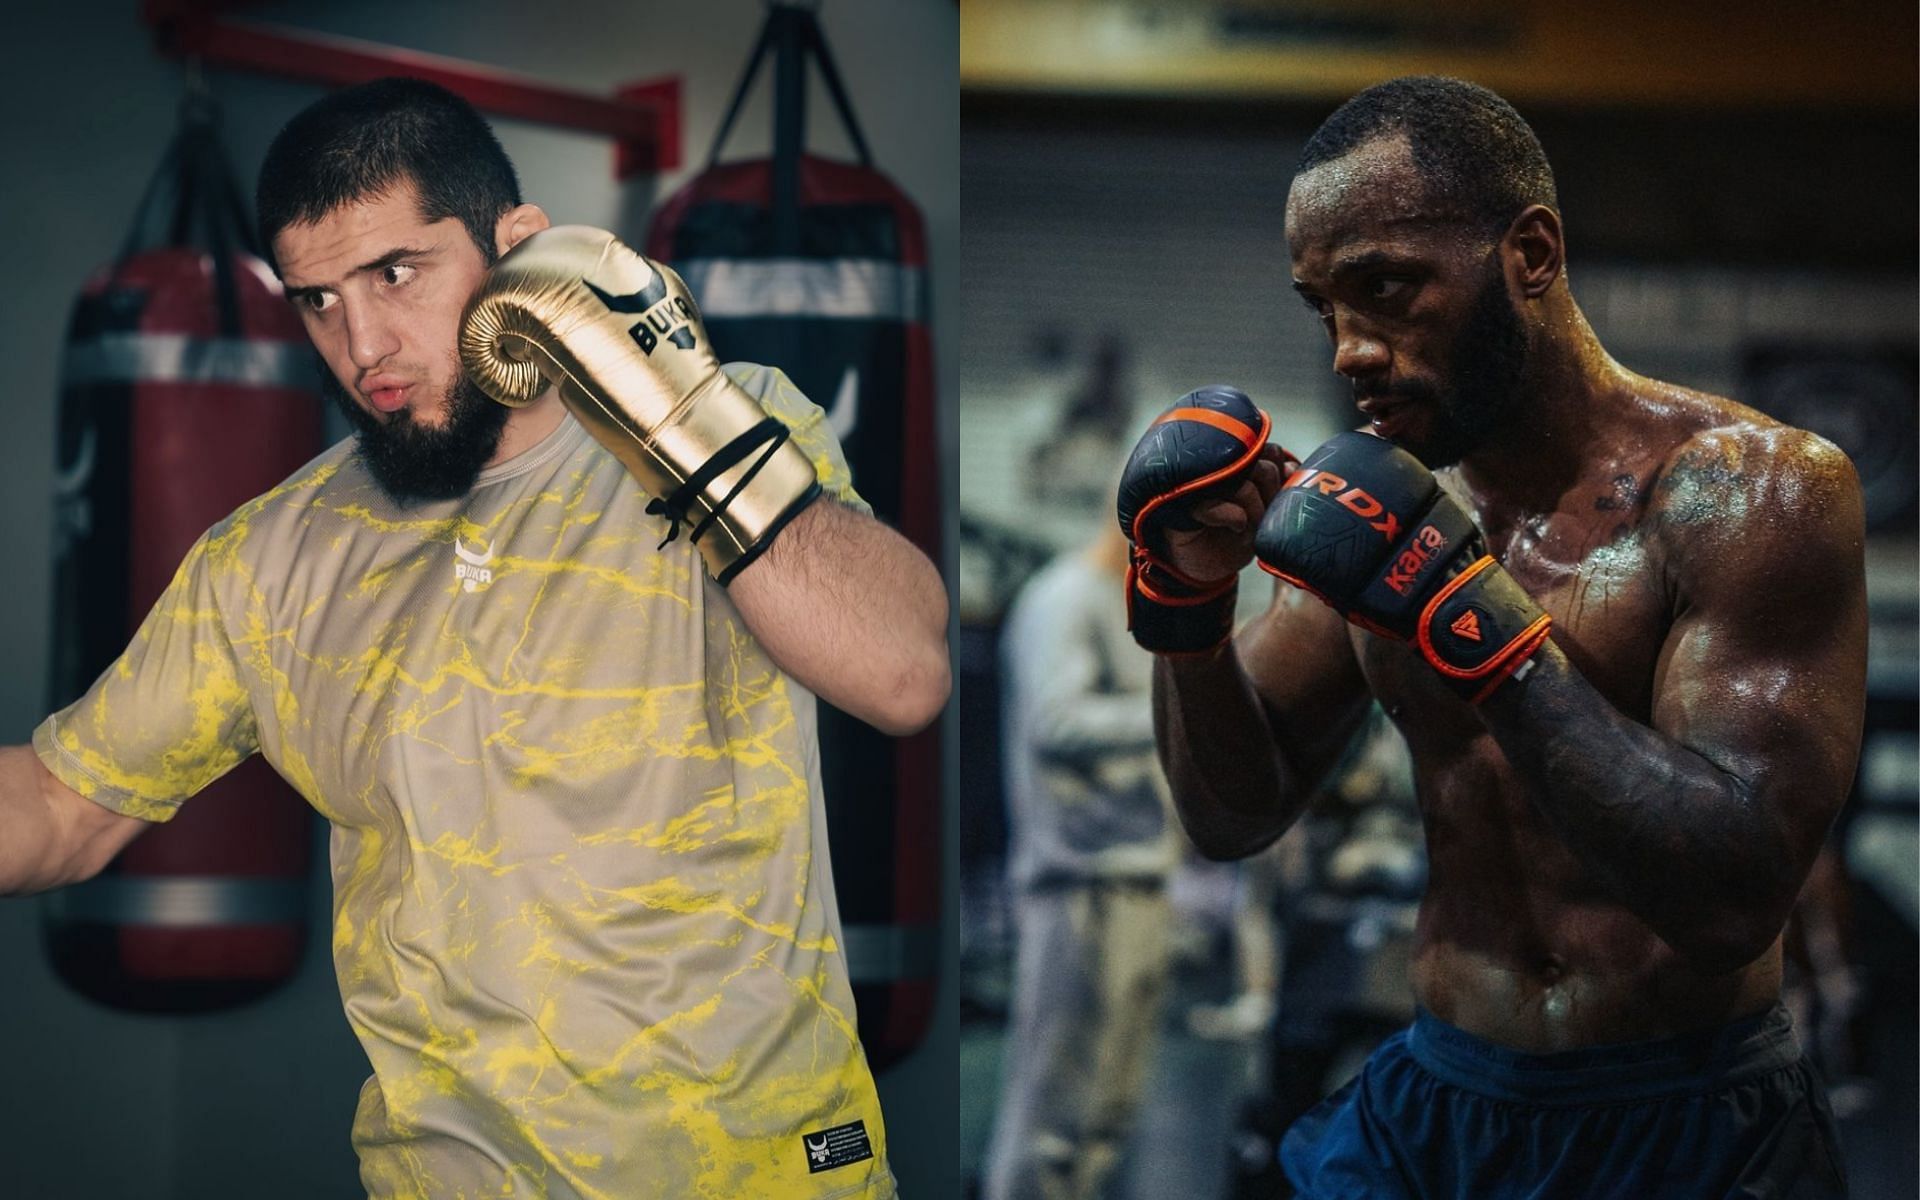 Islam Makhachev (left) discussed the fight negotiations for a previously targeted UFC 300 matchup with Leon Edwards (right) [Photo Courtesy @islam_makhachev and @leonedwardsmma on Instagram]